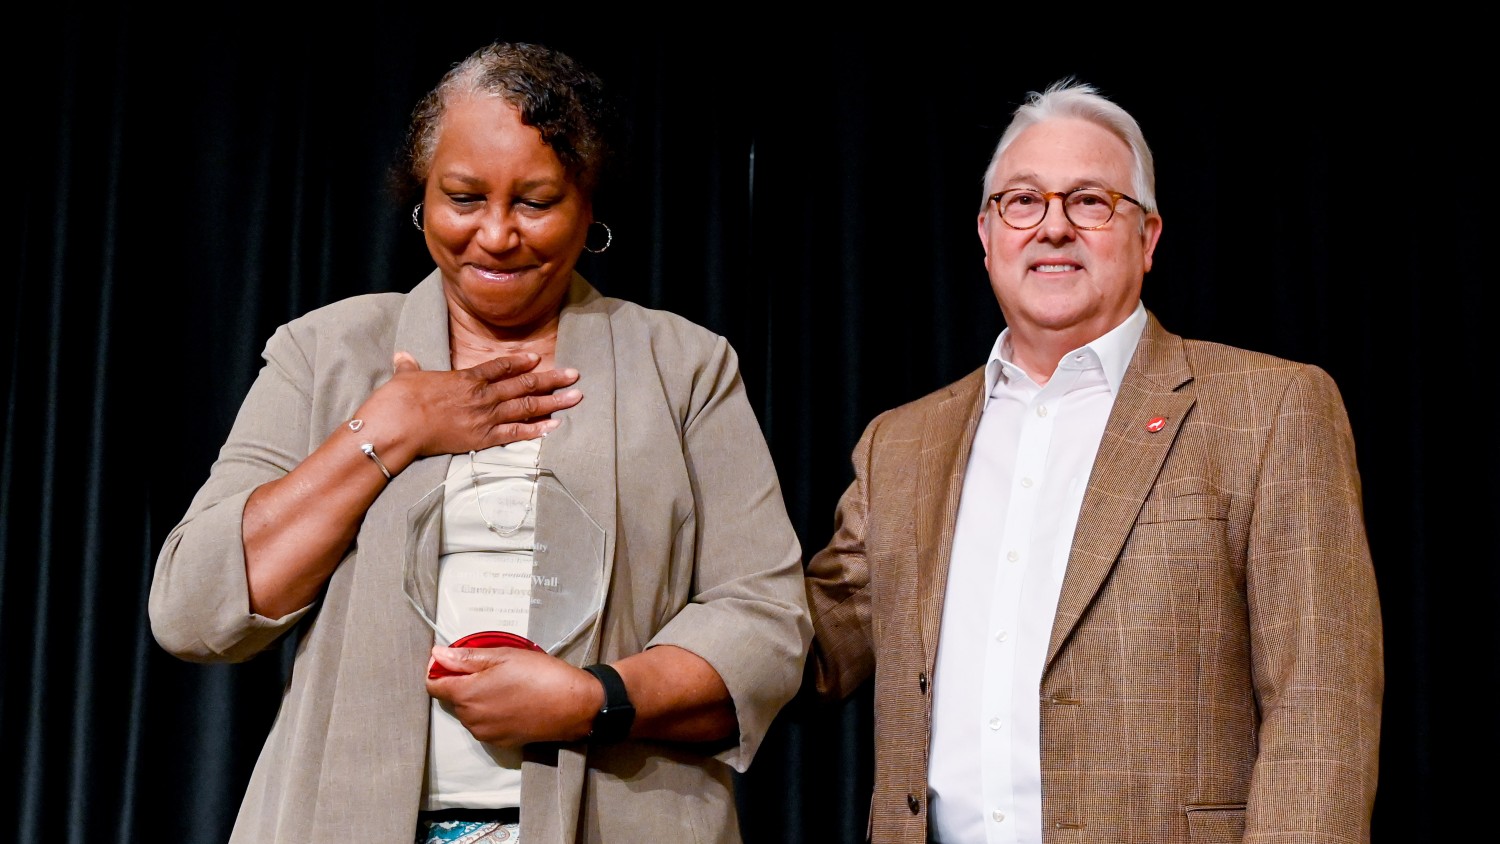 Chancellor Randy Woodson (right) congratulates Carolyn Wall (left), a student services manager in Enrollment Management and Services, for achieving 40 years of service at NC State. The university recently hosted two events to honor employees who reached five-year service milestones.